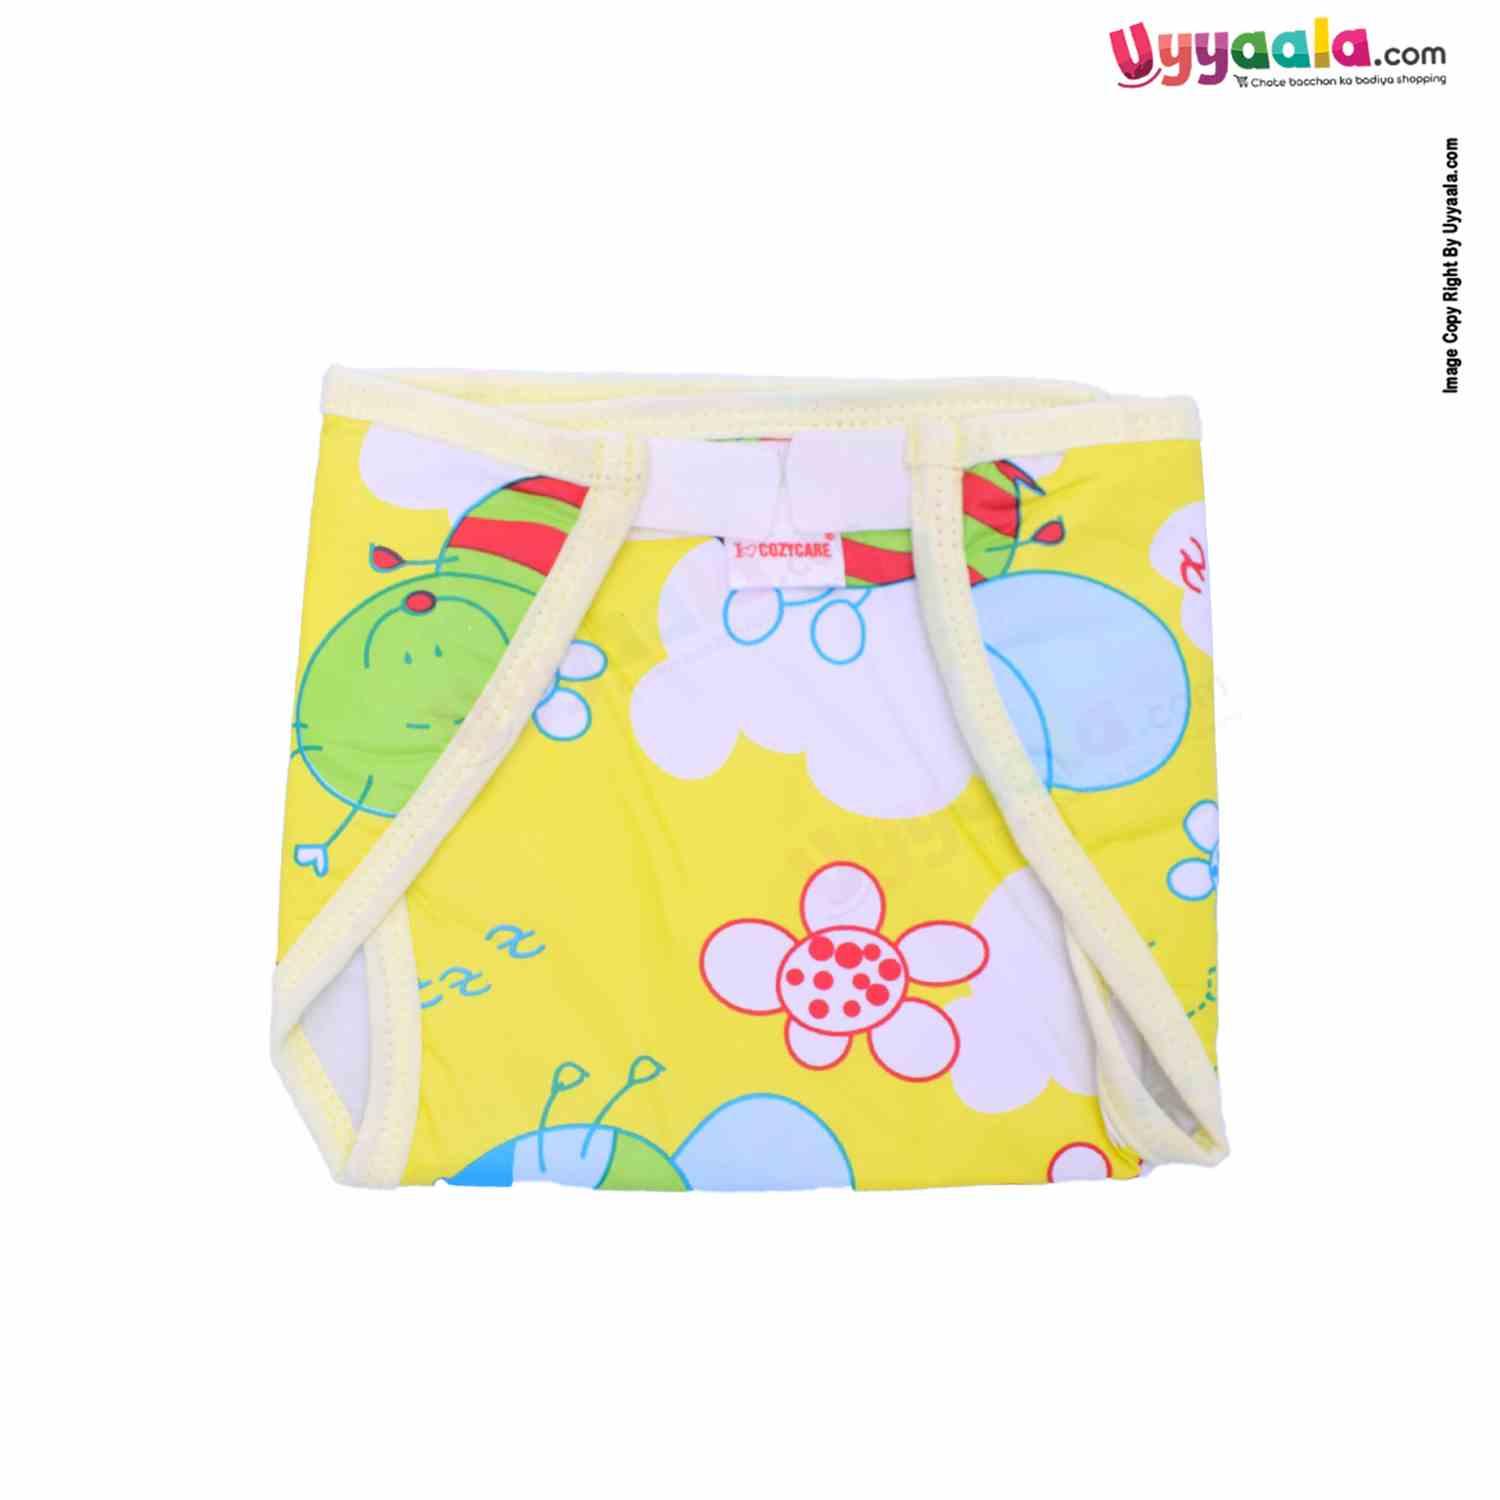 COZYCARE Washable Diapers Plastic Velcro, Honey Bee Print Pink, Blue & Yellow With Out Pads- 3P Set (L)